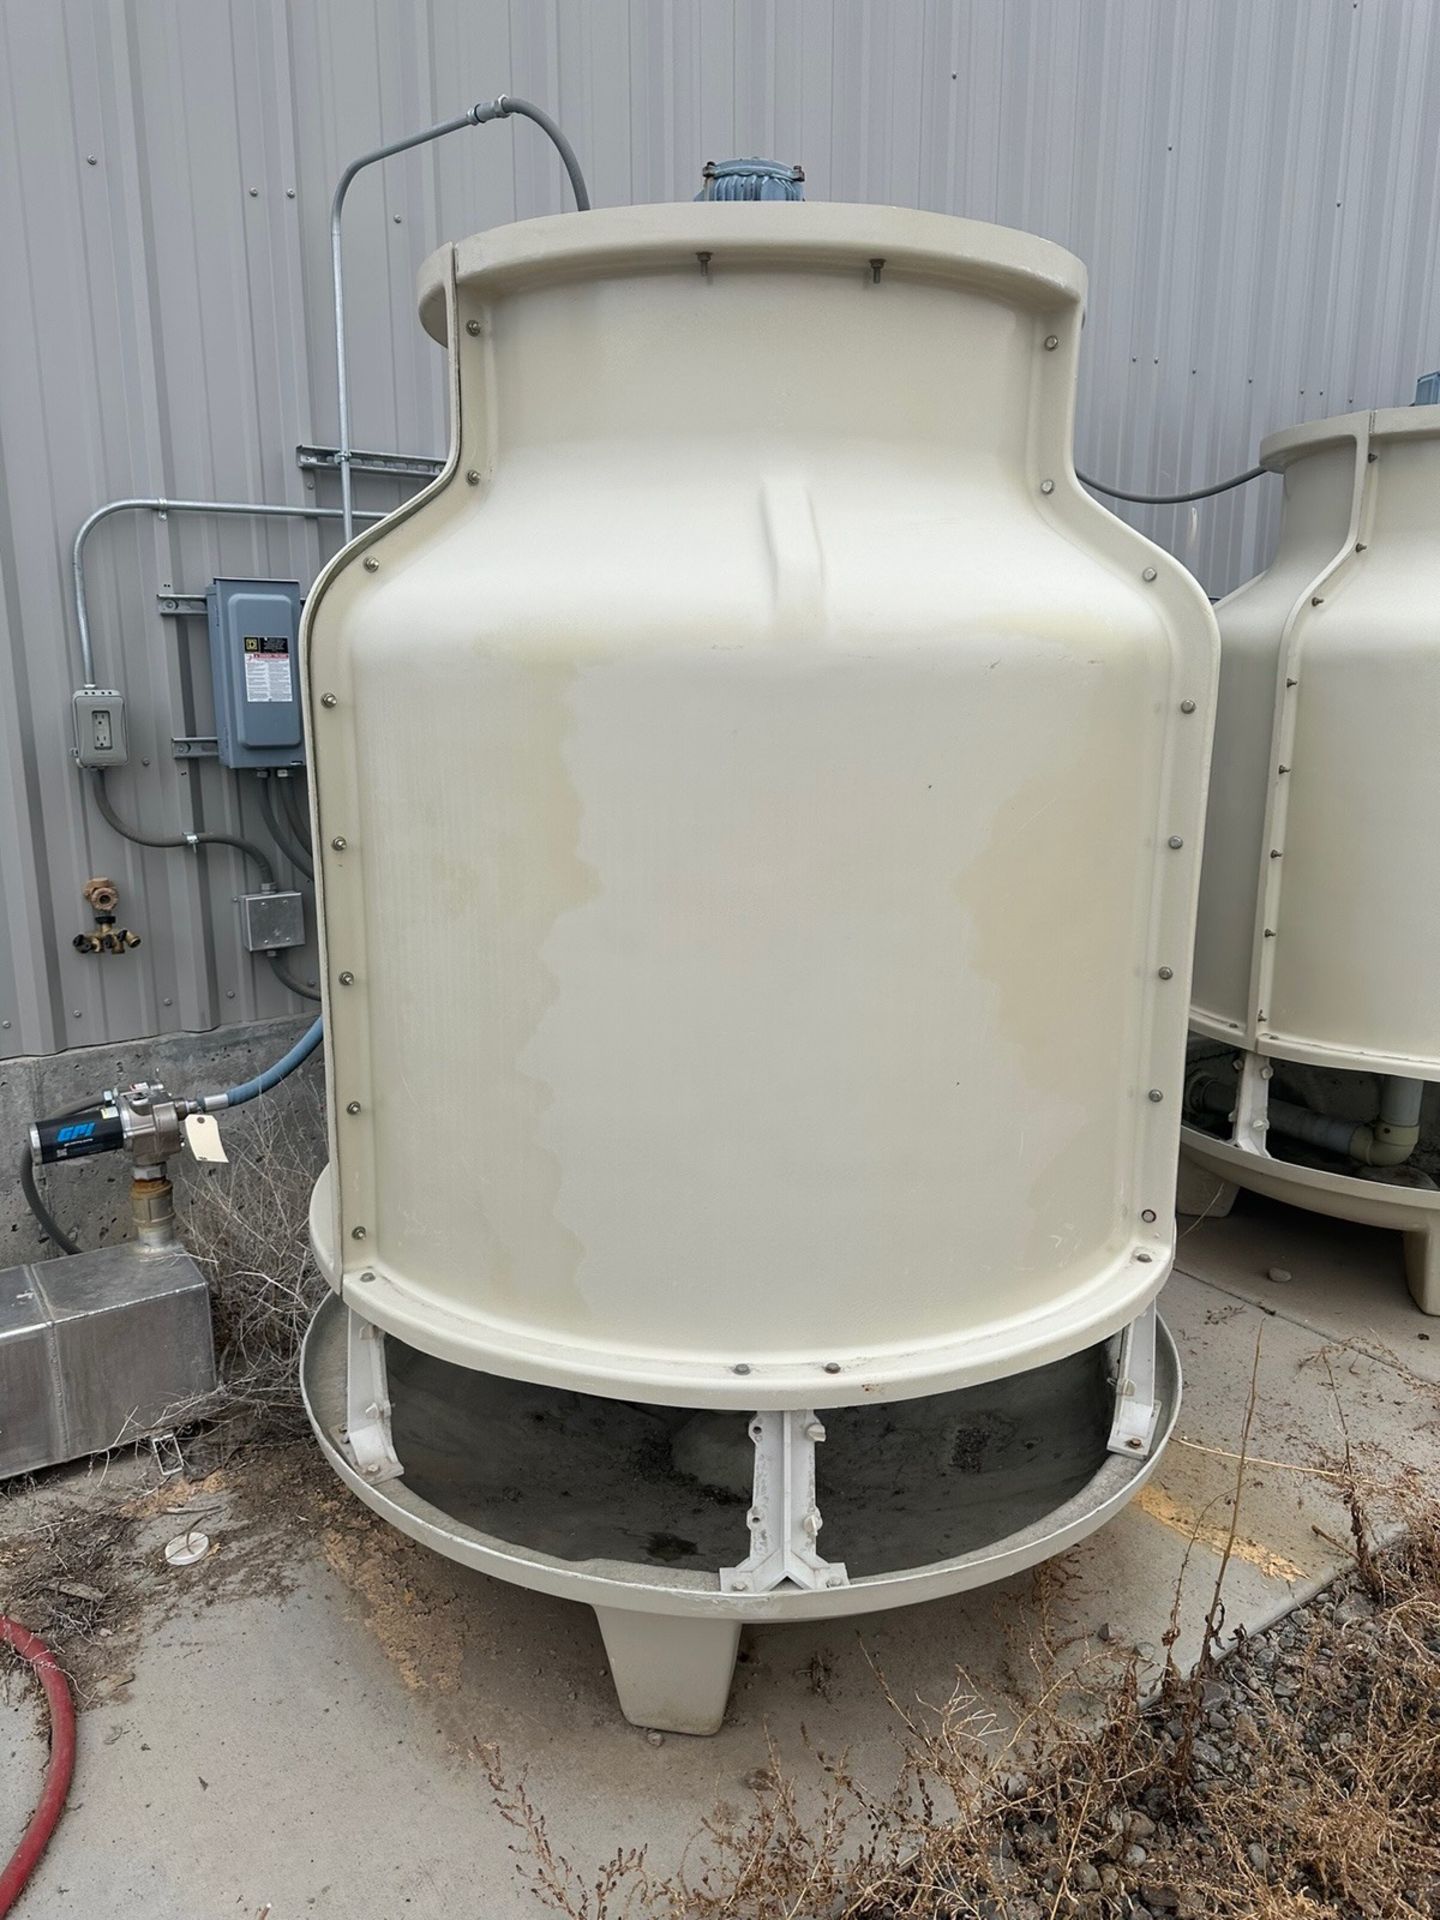 Mini Cooling Tower for Fluid Circulating Water System | Rig Fee $175